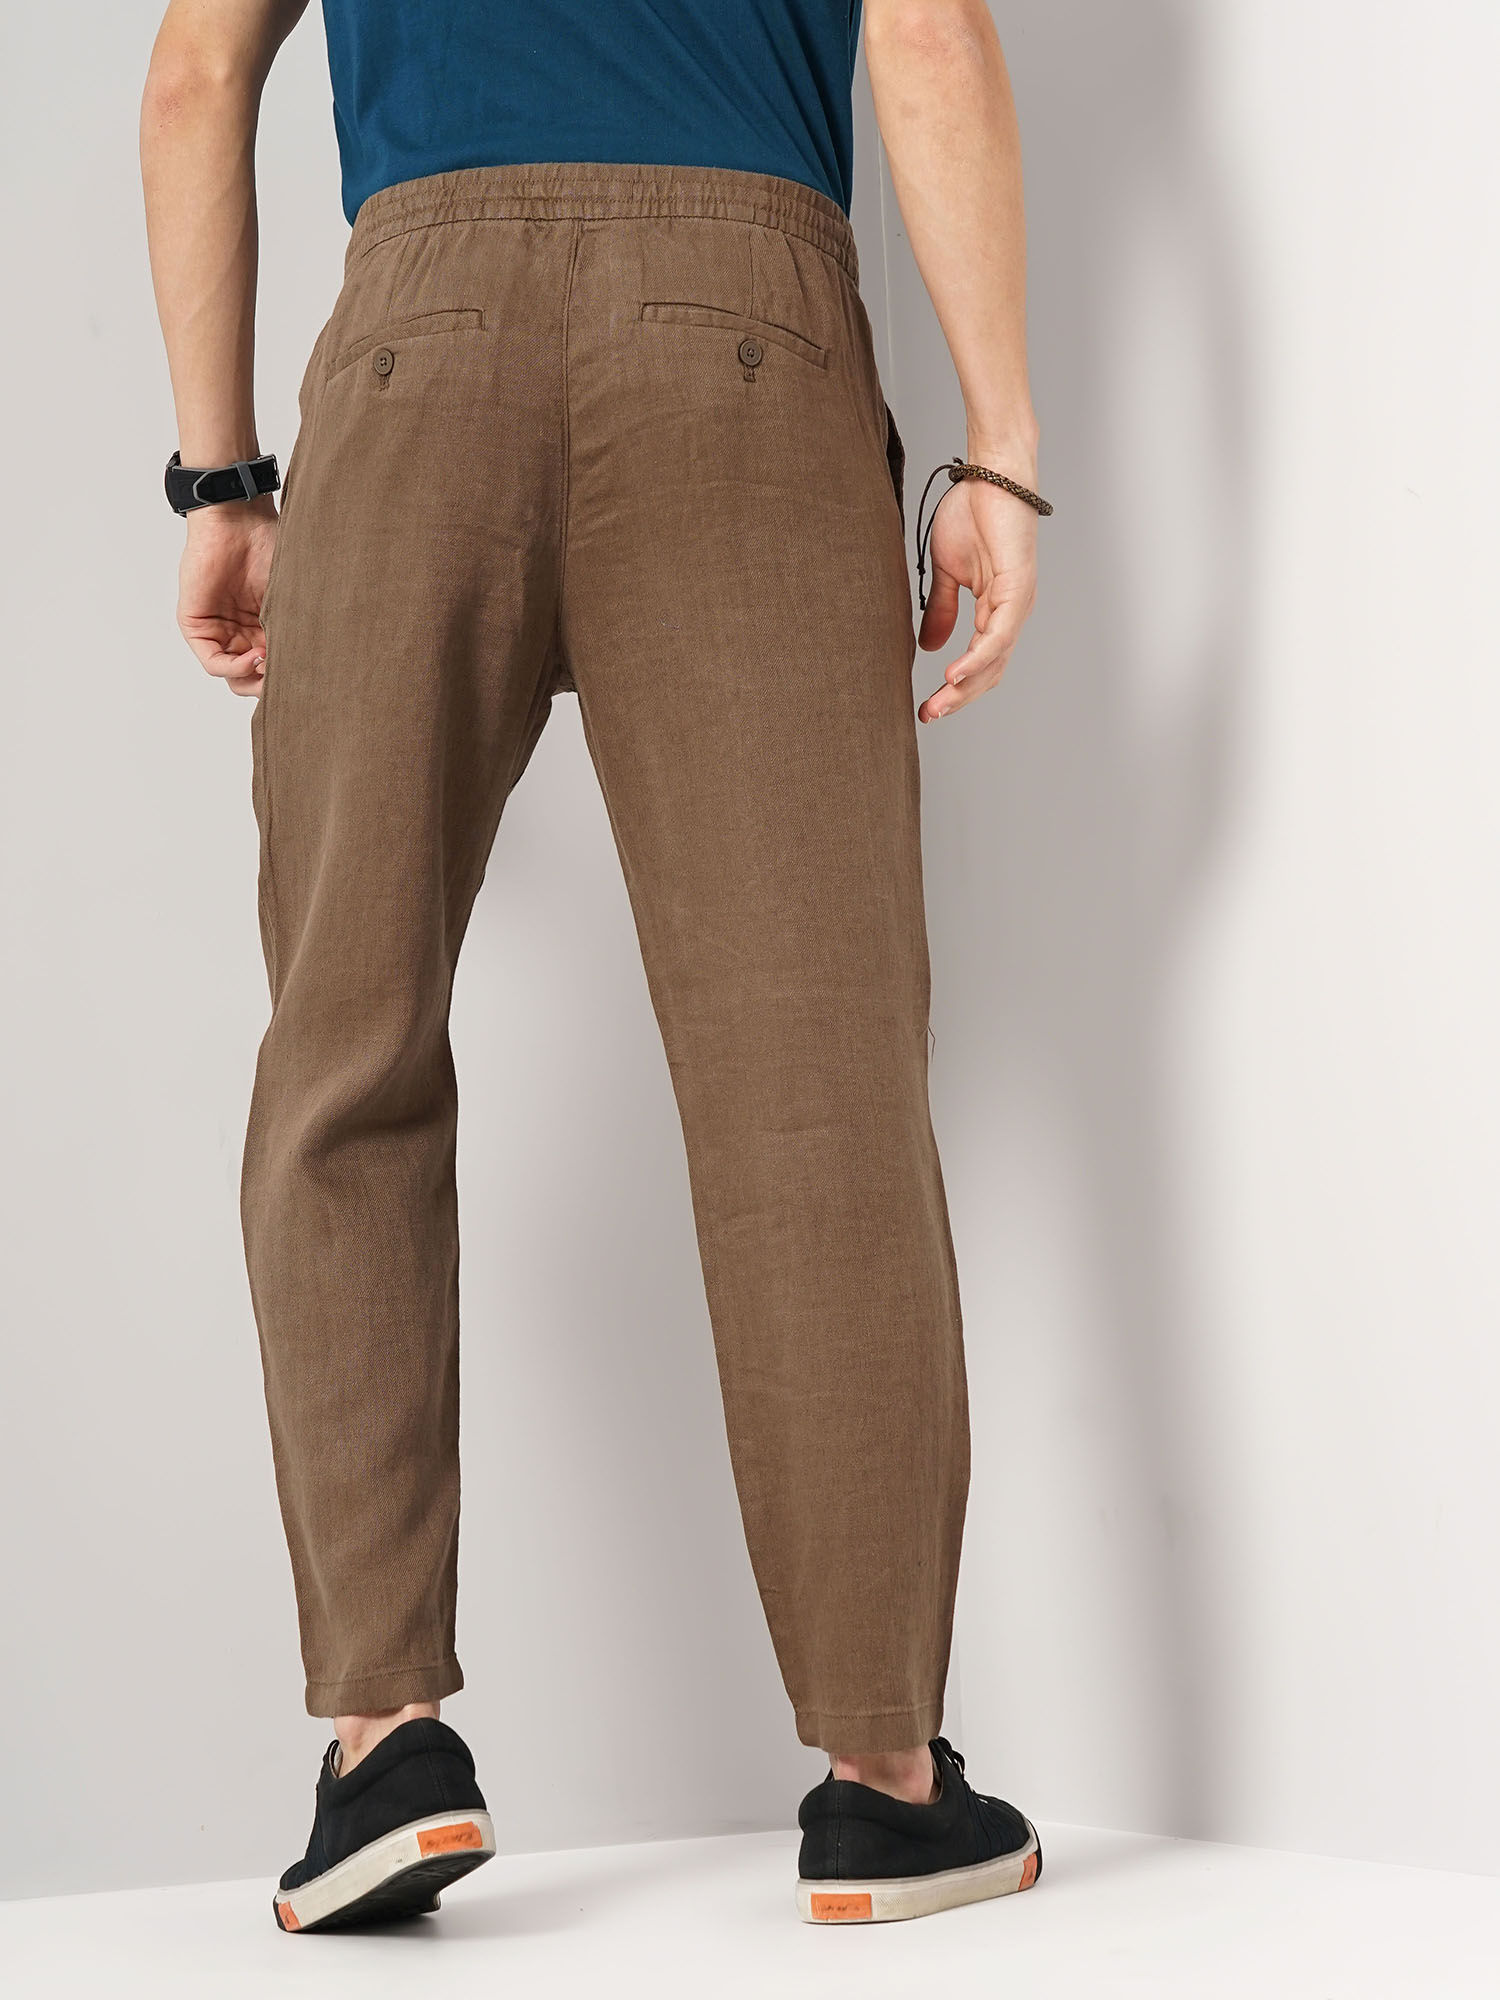 Buy CELIO Olive Solid Cotton Straight Fit Men's Trousers | Shoppers Stop